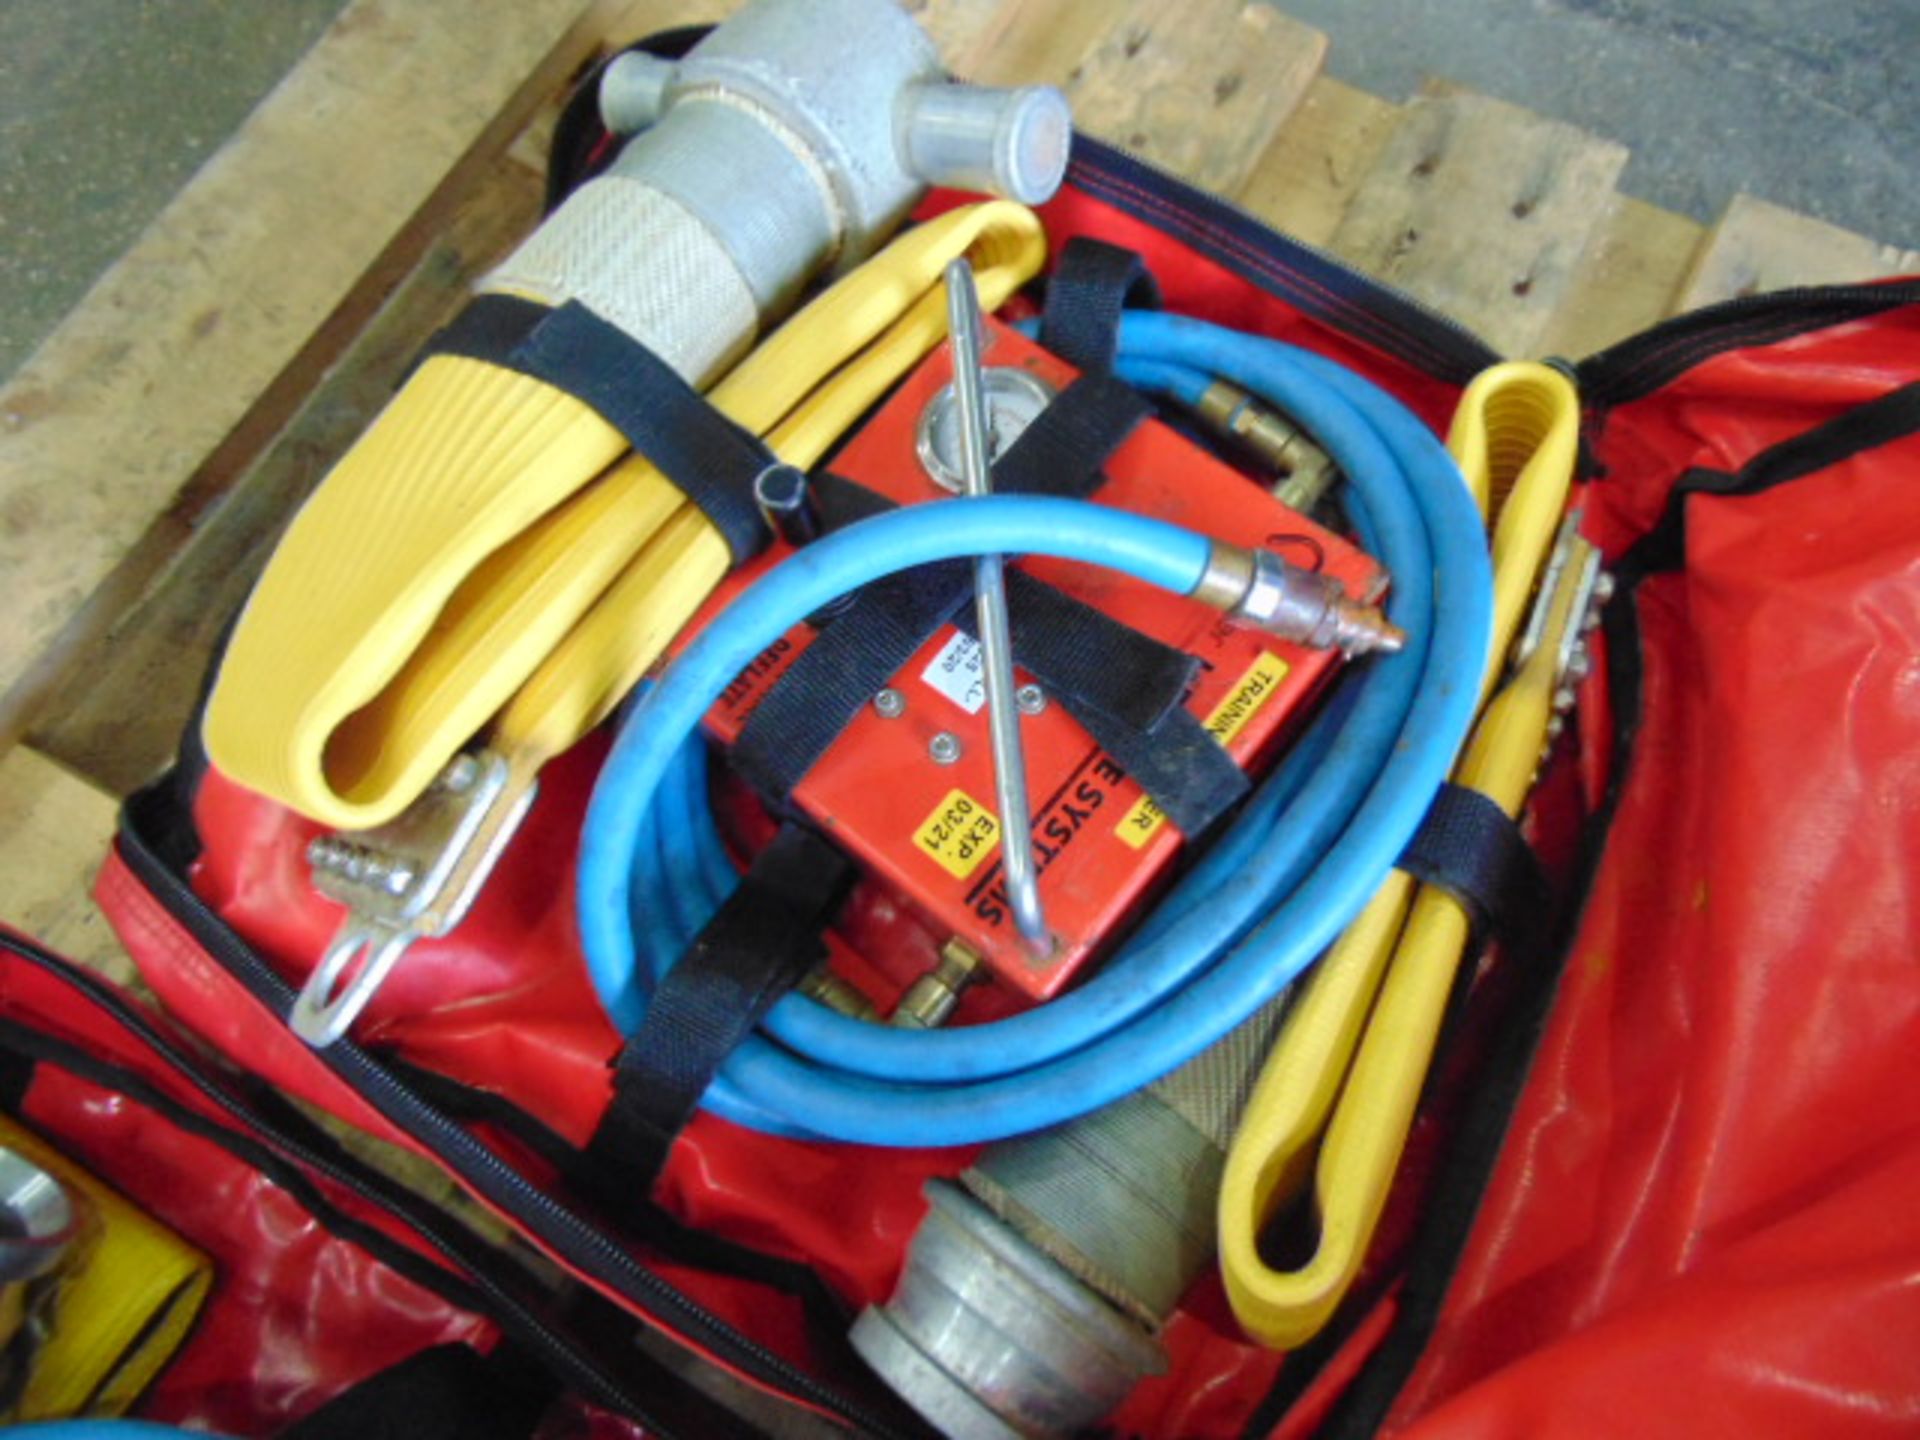 QTY 2 x Premier Lifeline Hose Inflation Systems - Image 3 of 5